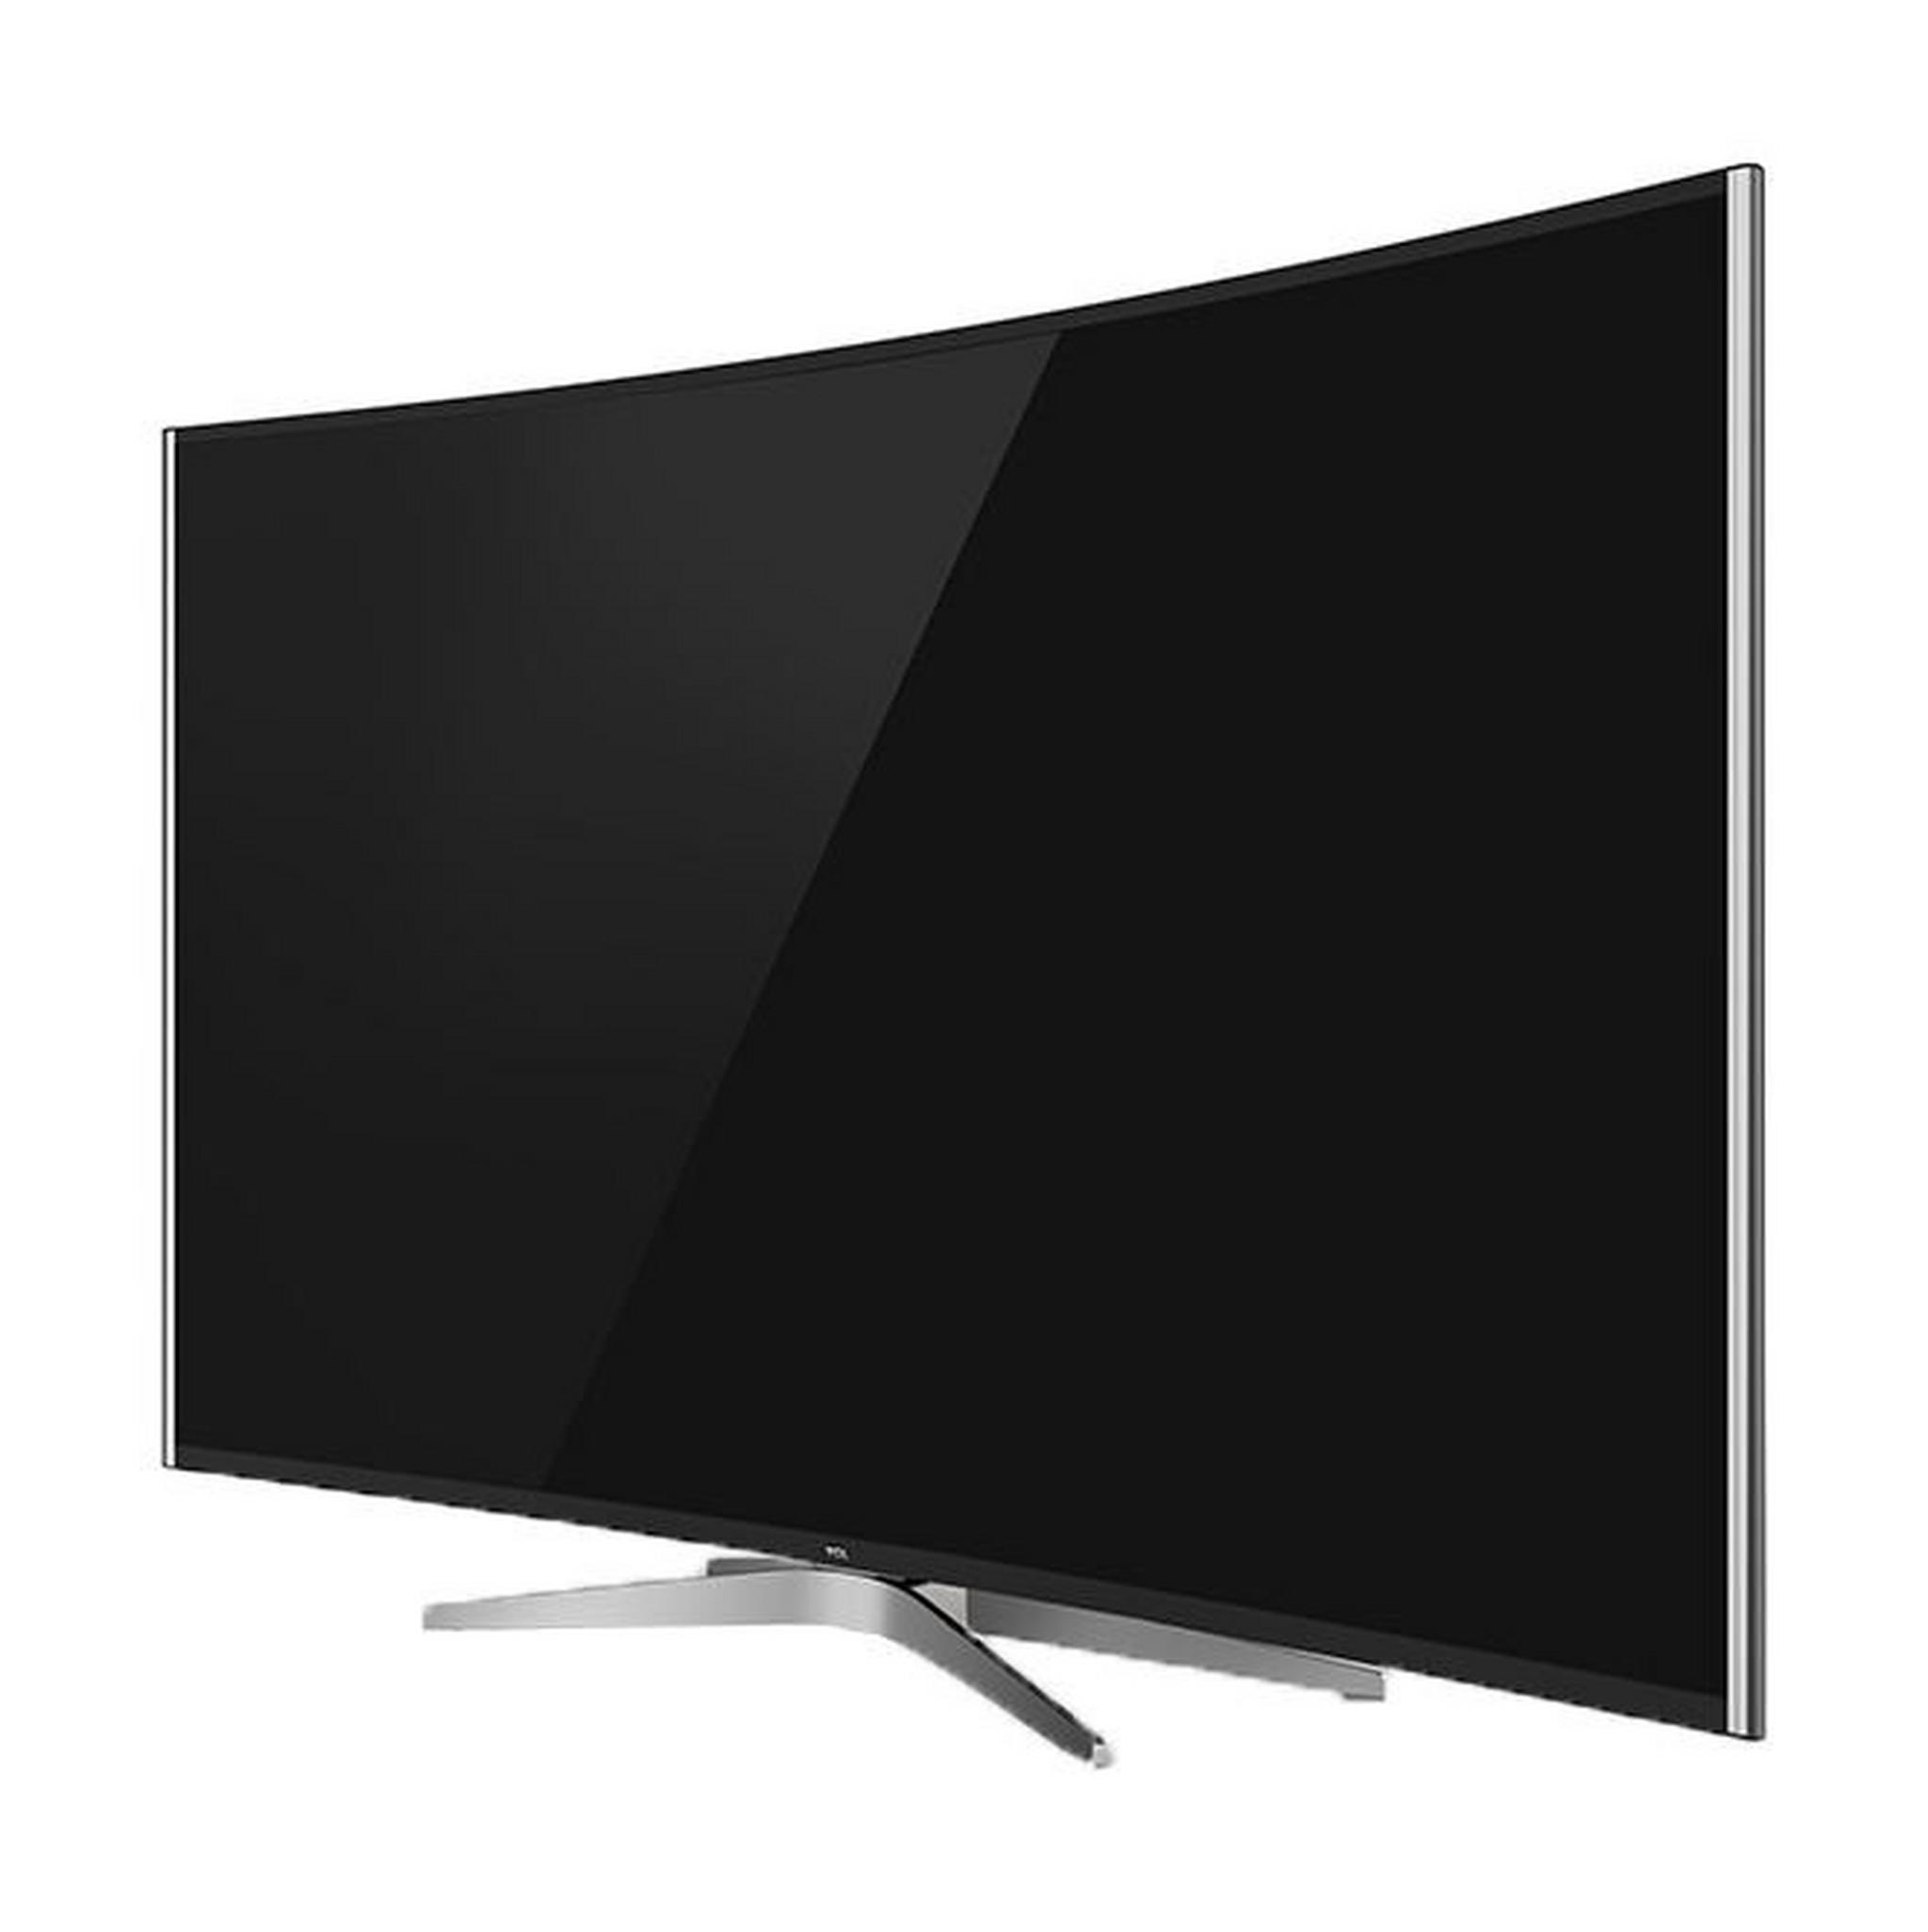 TCL 55 inch Curved 4K Ultra HD Smart LED TV - C55C1CUS